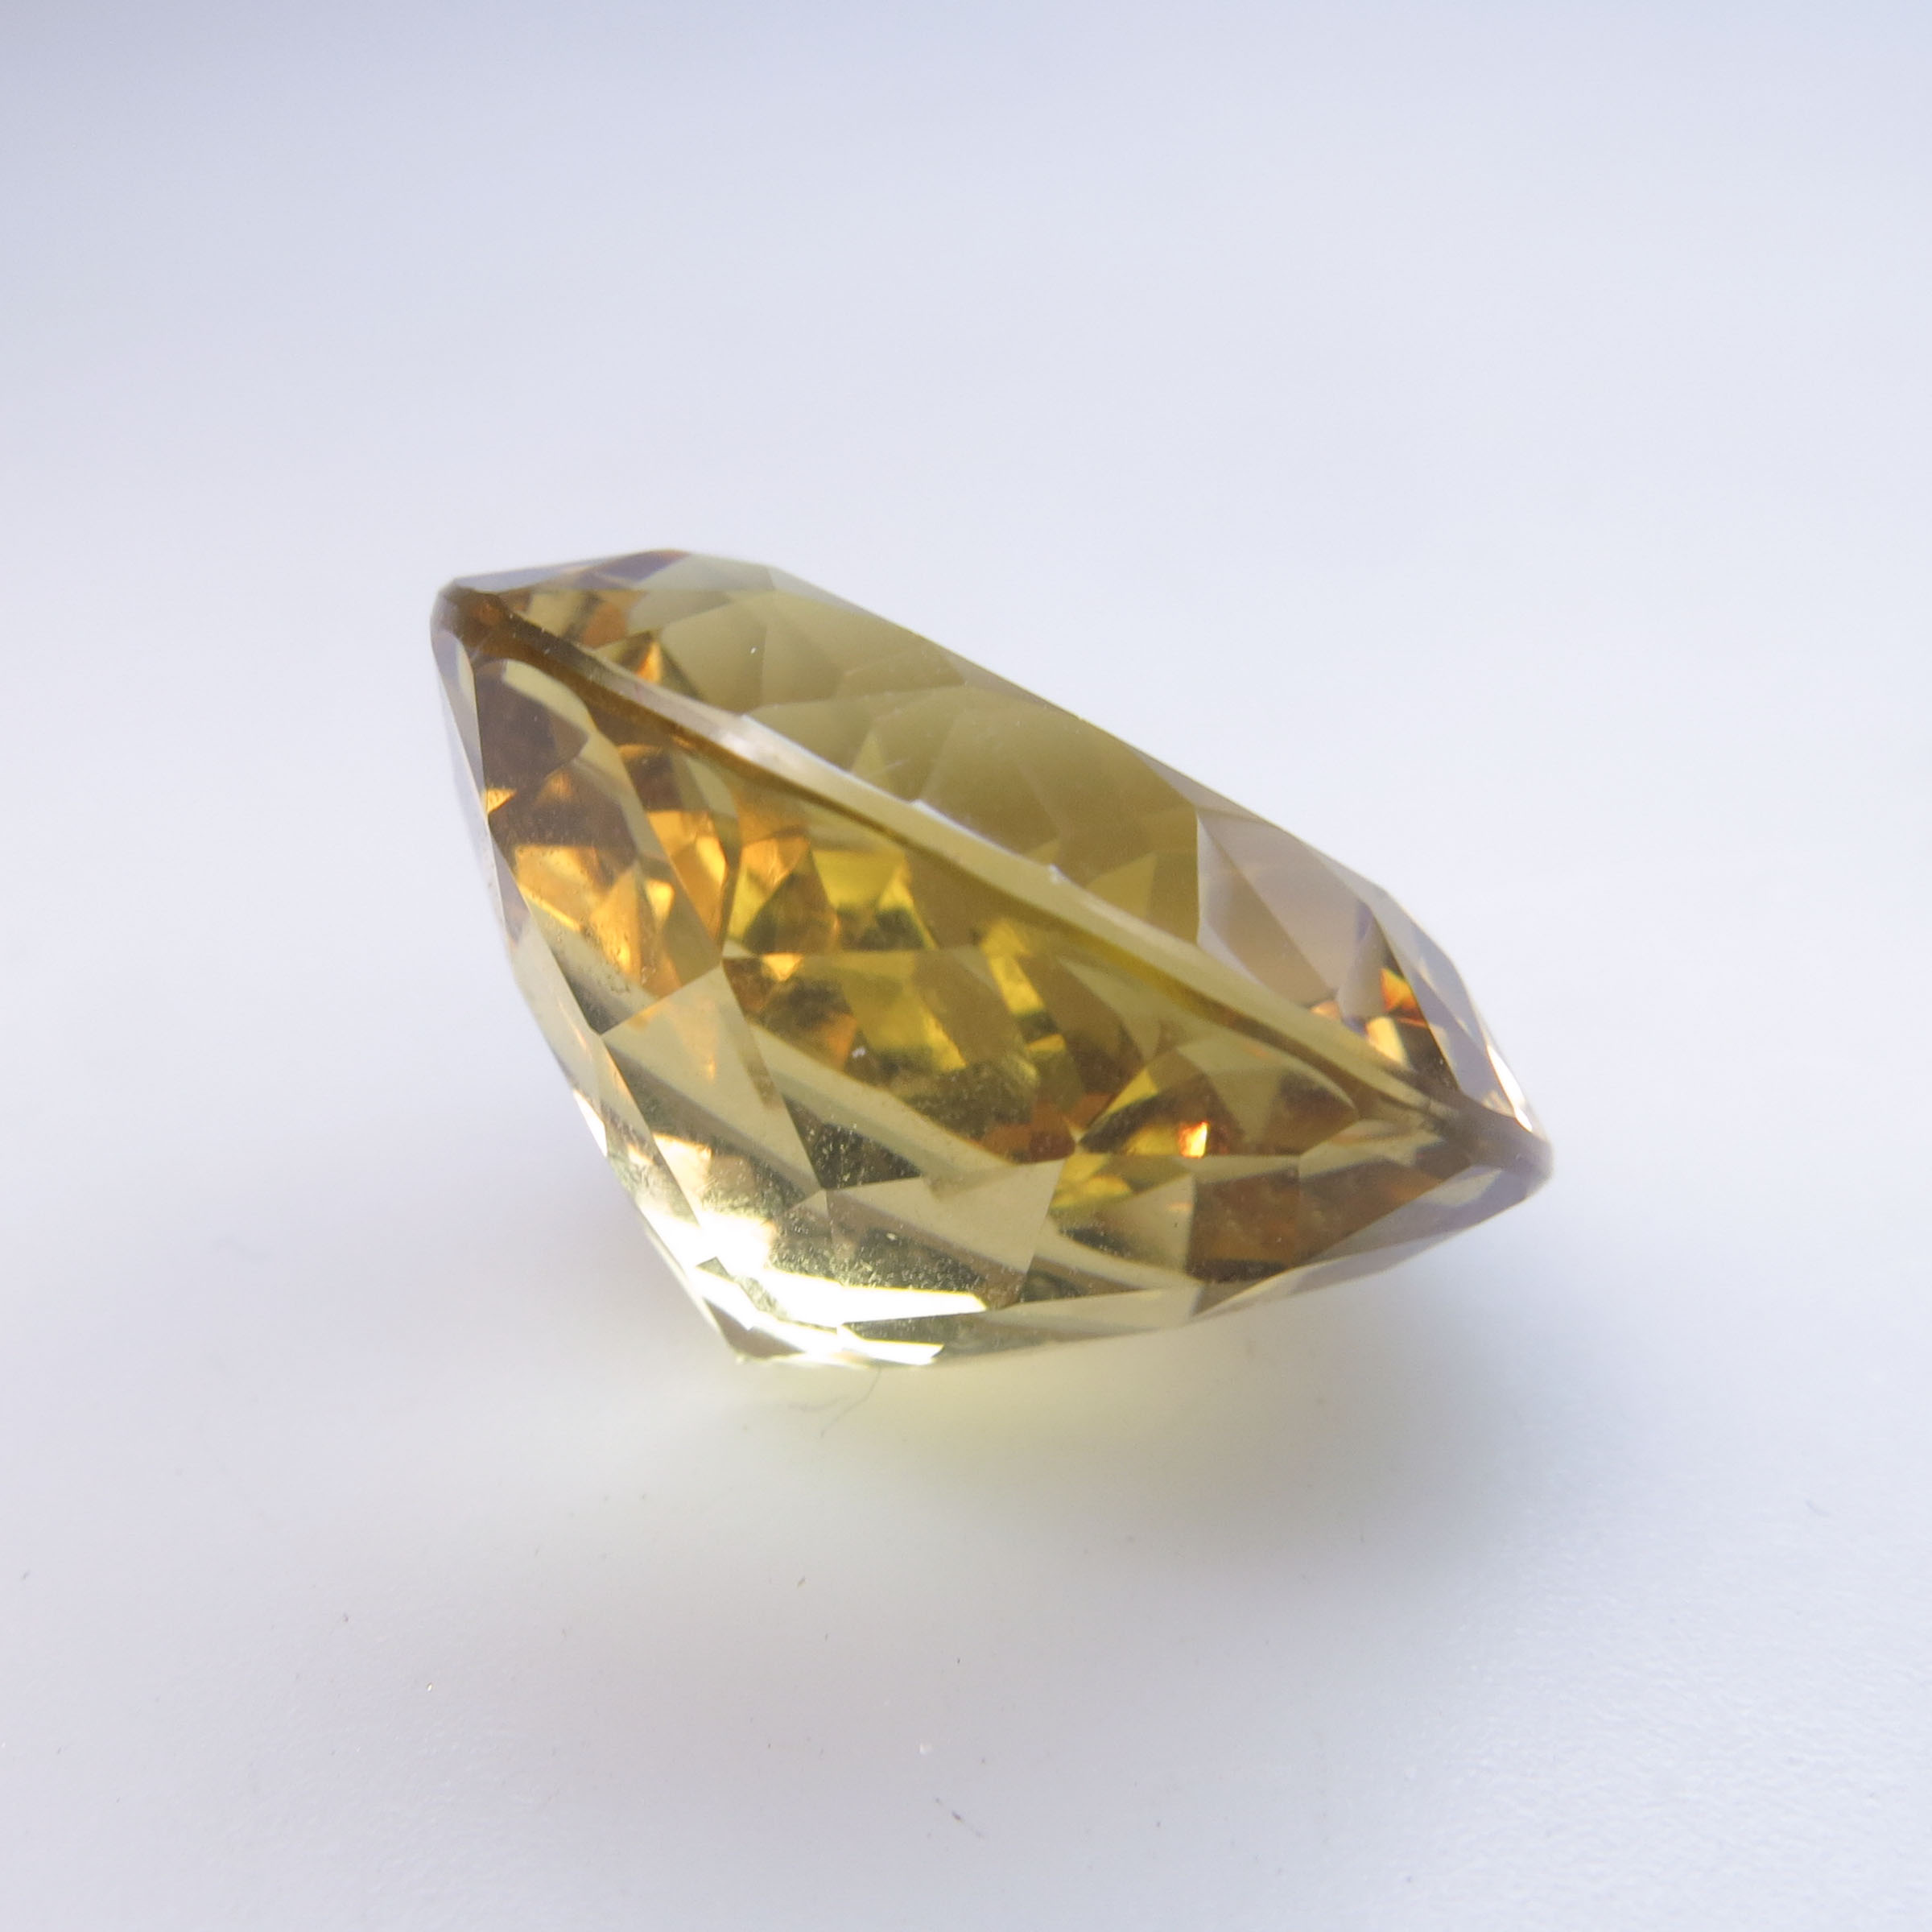 Large Unmounted Fancy Round Cut Citrine